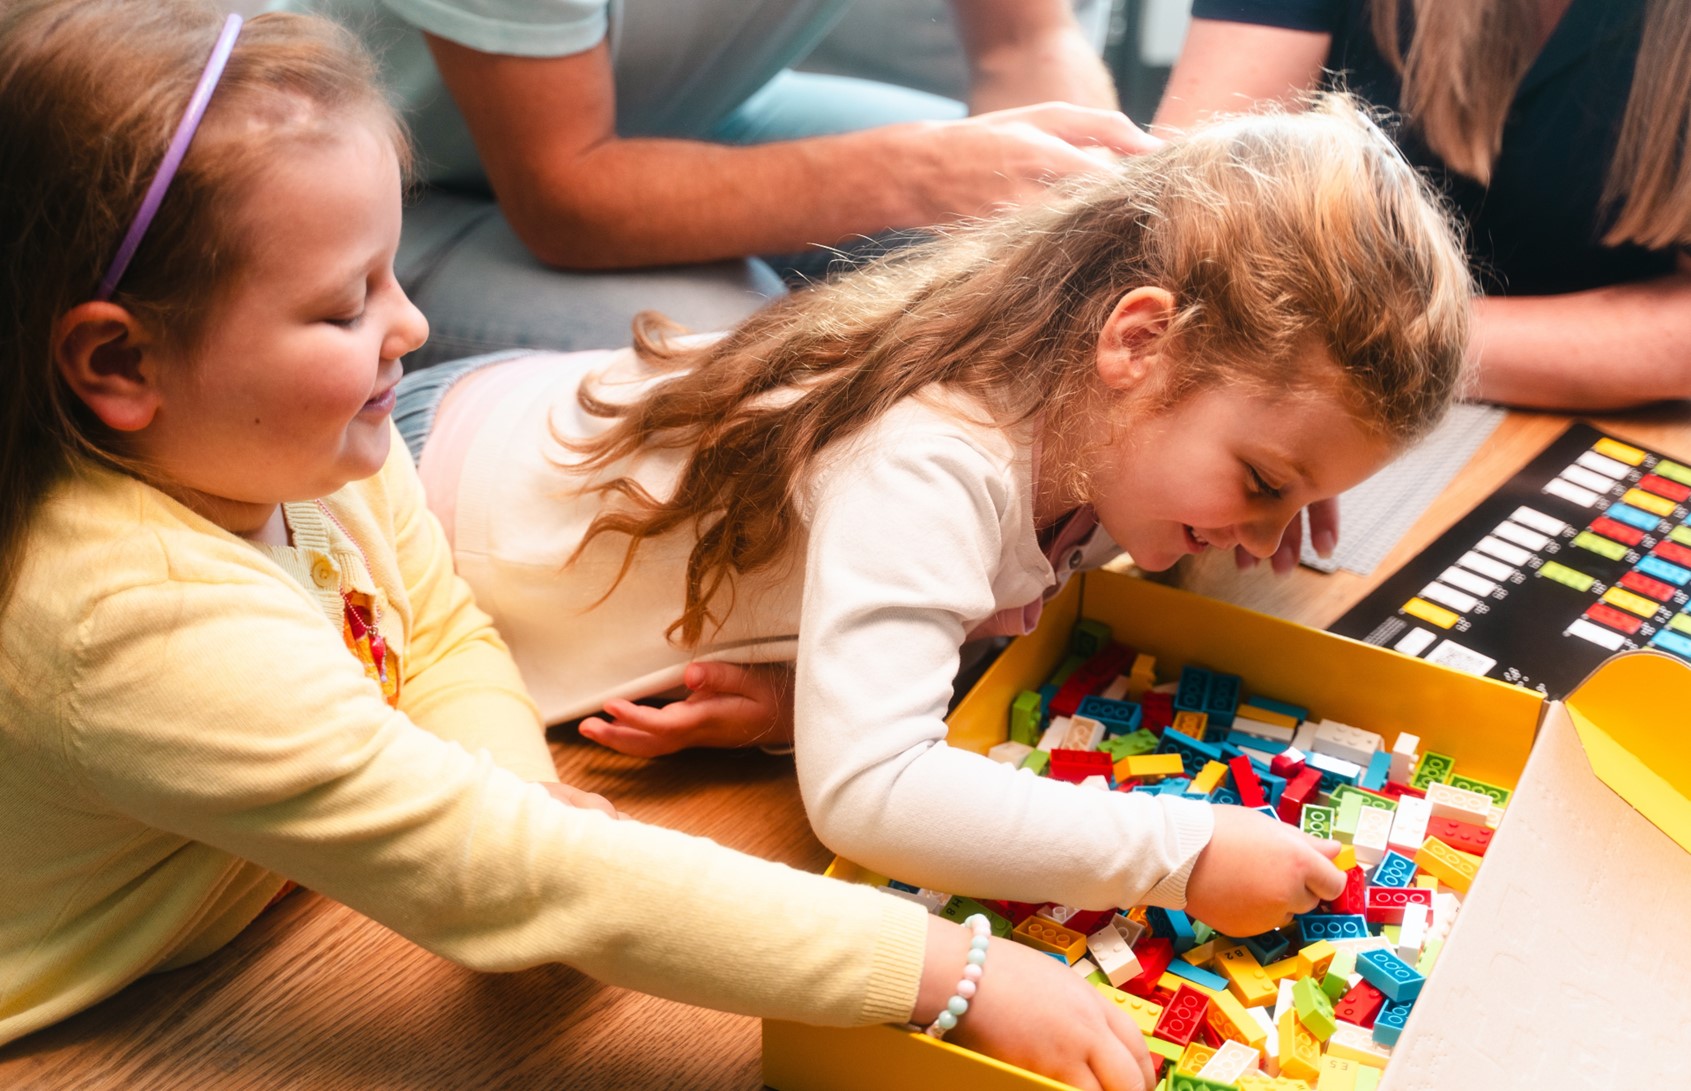 An image of children playing Lego braille blocks